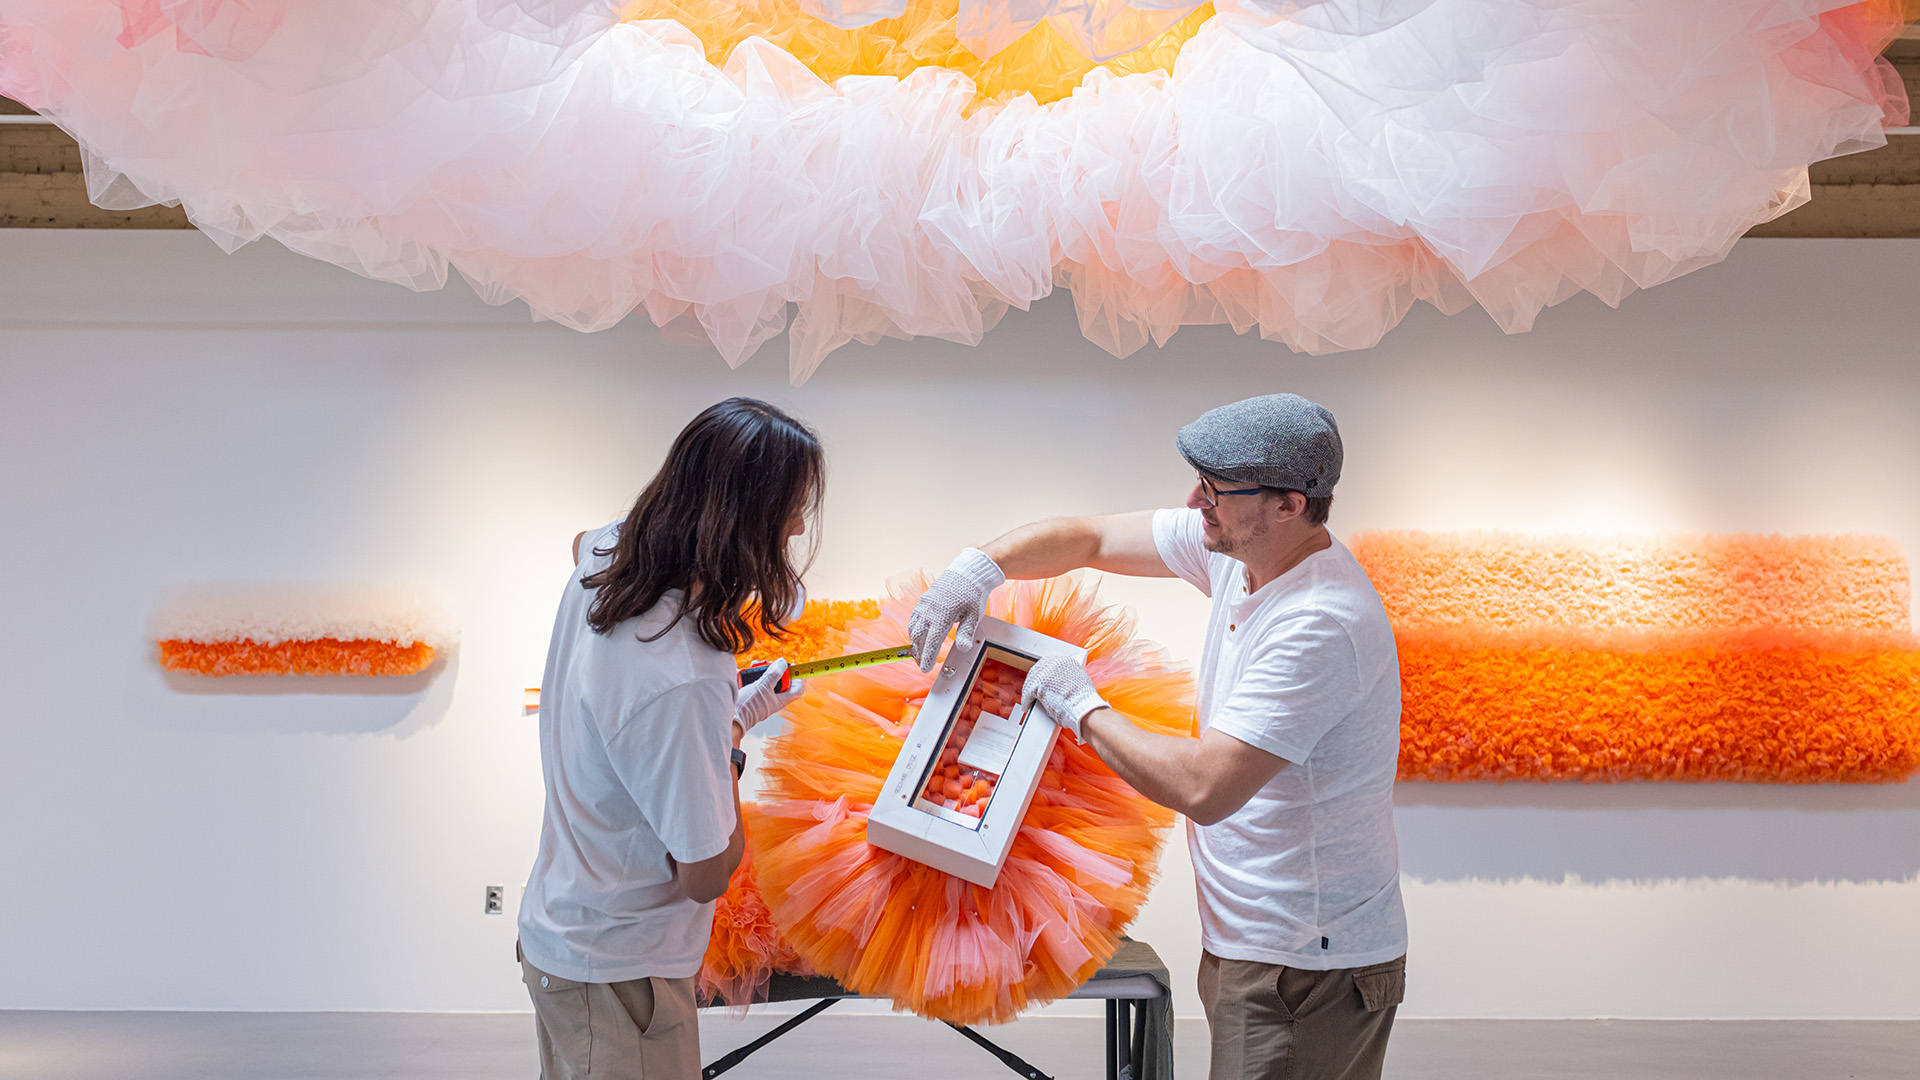 Andrew Cline, right, and Maxwell Kwan are installing work of Ana María Hernando for an exhibition Colorado Women to Watch.